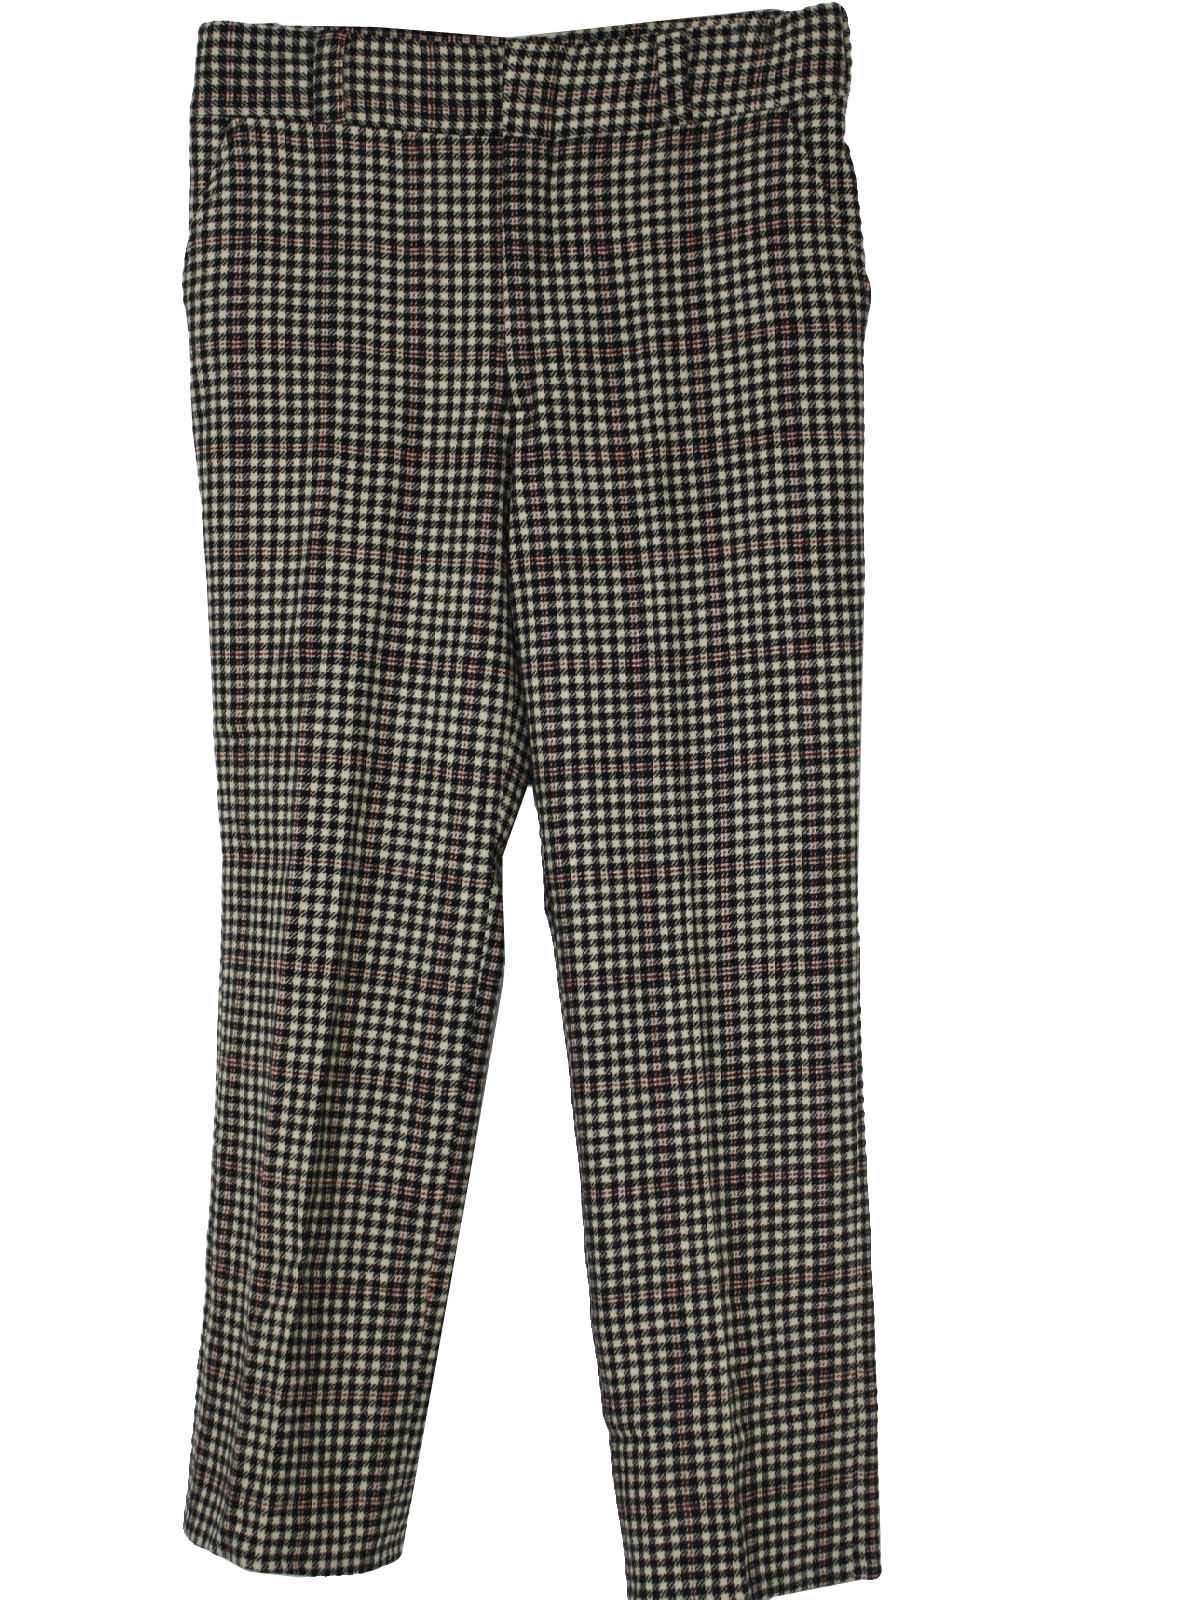 Retro 80's Pants: 80s -Asher- Mens black, white and red wool flat front ...